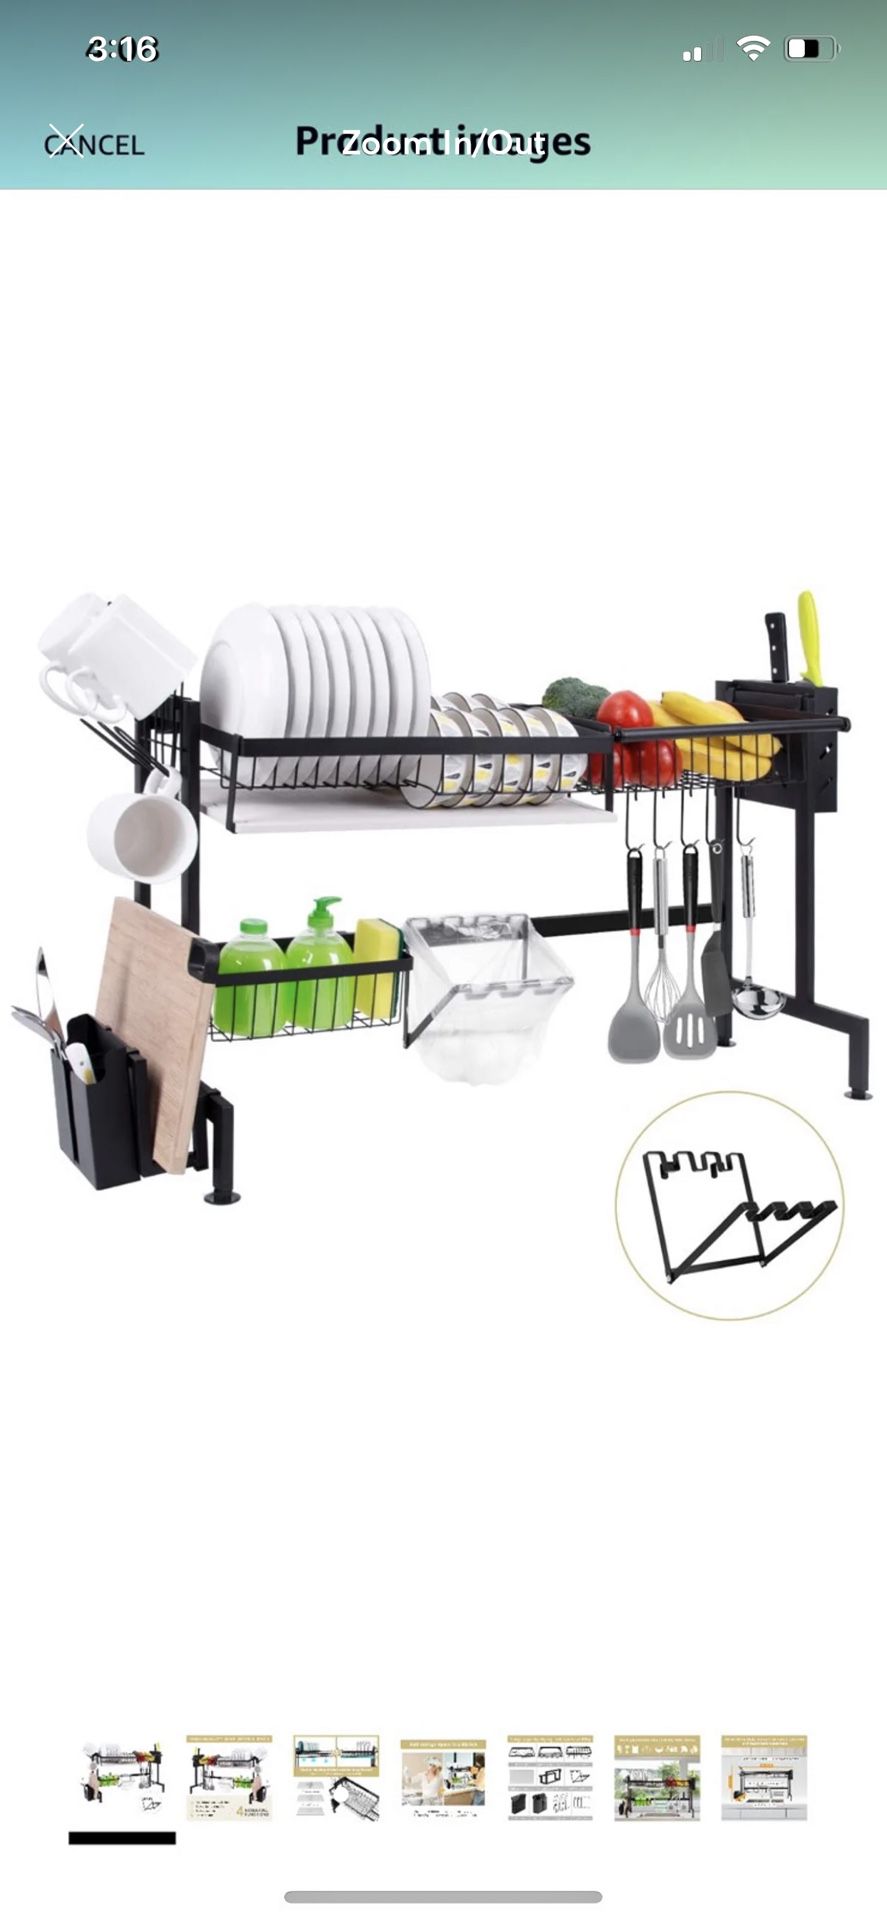 Dish Drying Rack, Over Sink Dish Drying Rack For Kitchen Organizer Storage Space Saver, Kitchen Counter Utensils Holder Dish Rack Stainless Steel Dry